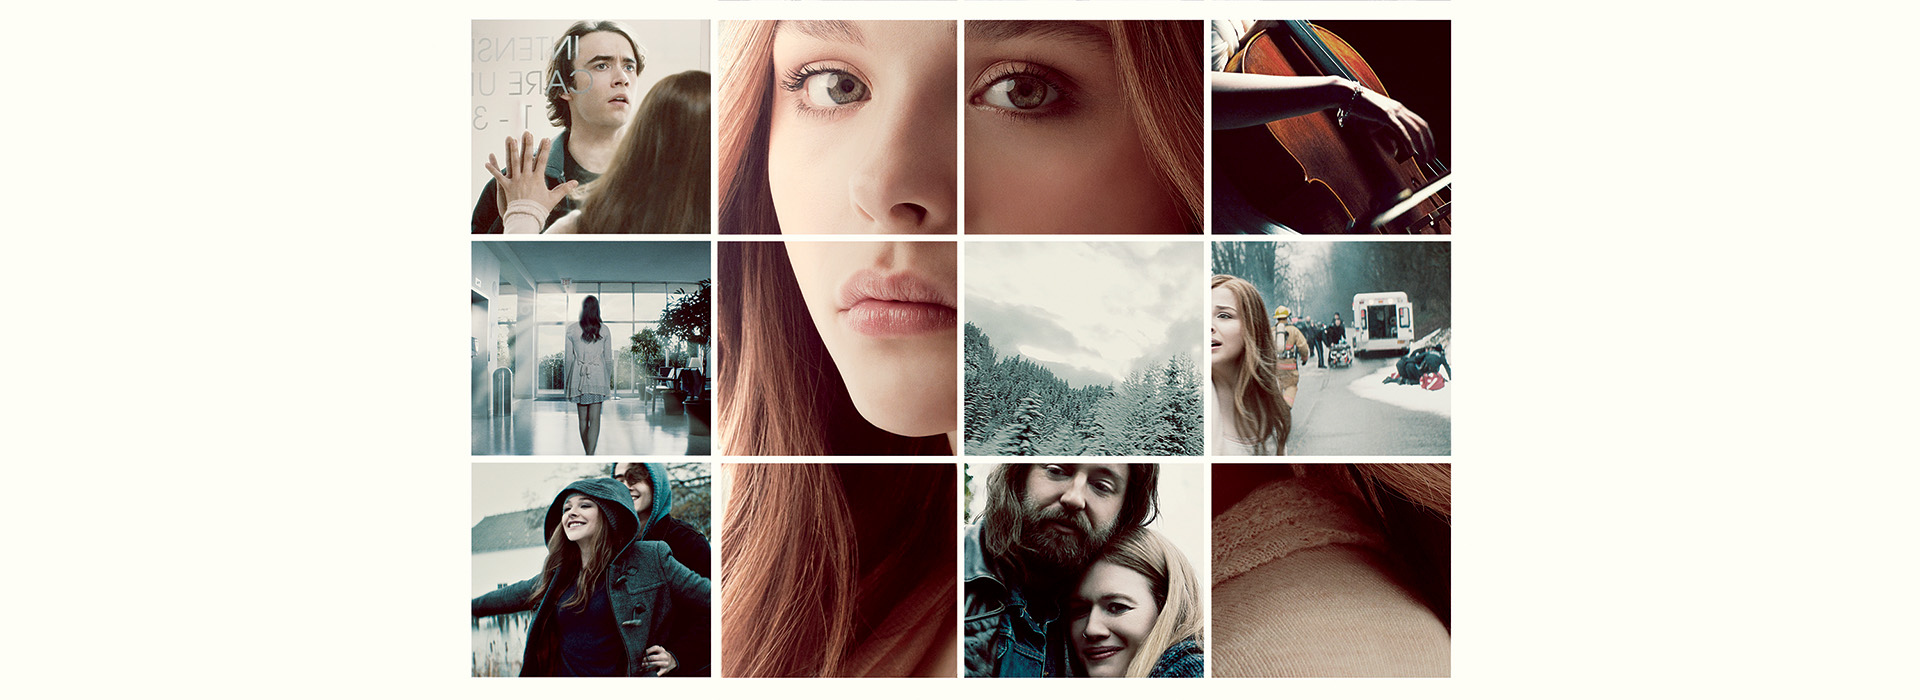 Movie poster If I Stay